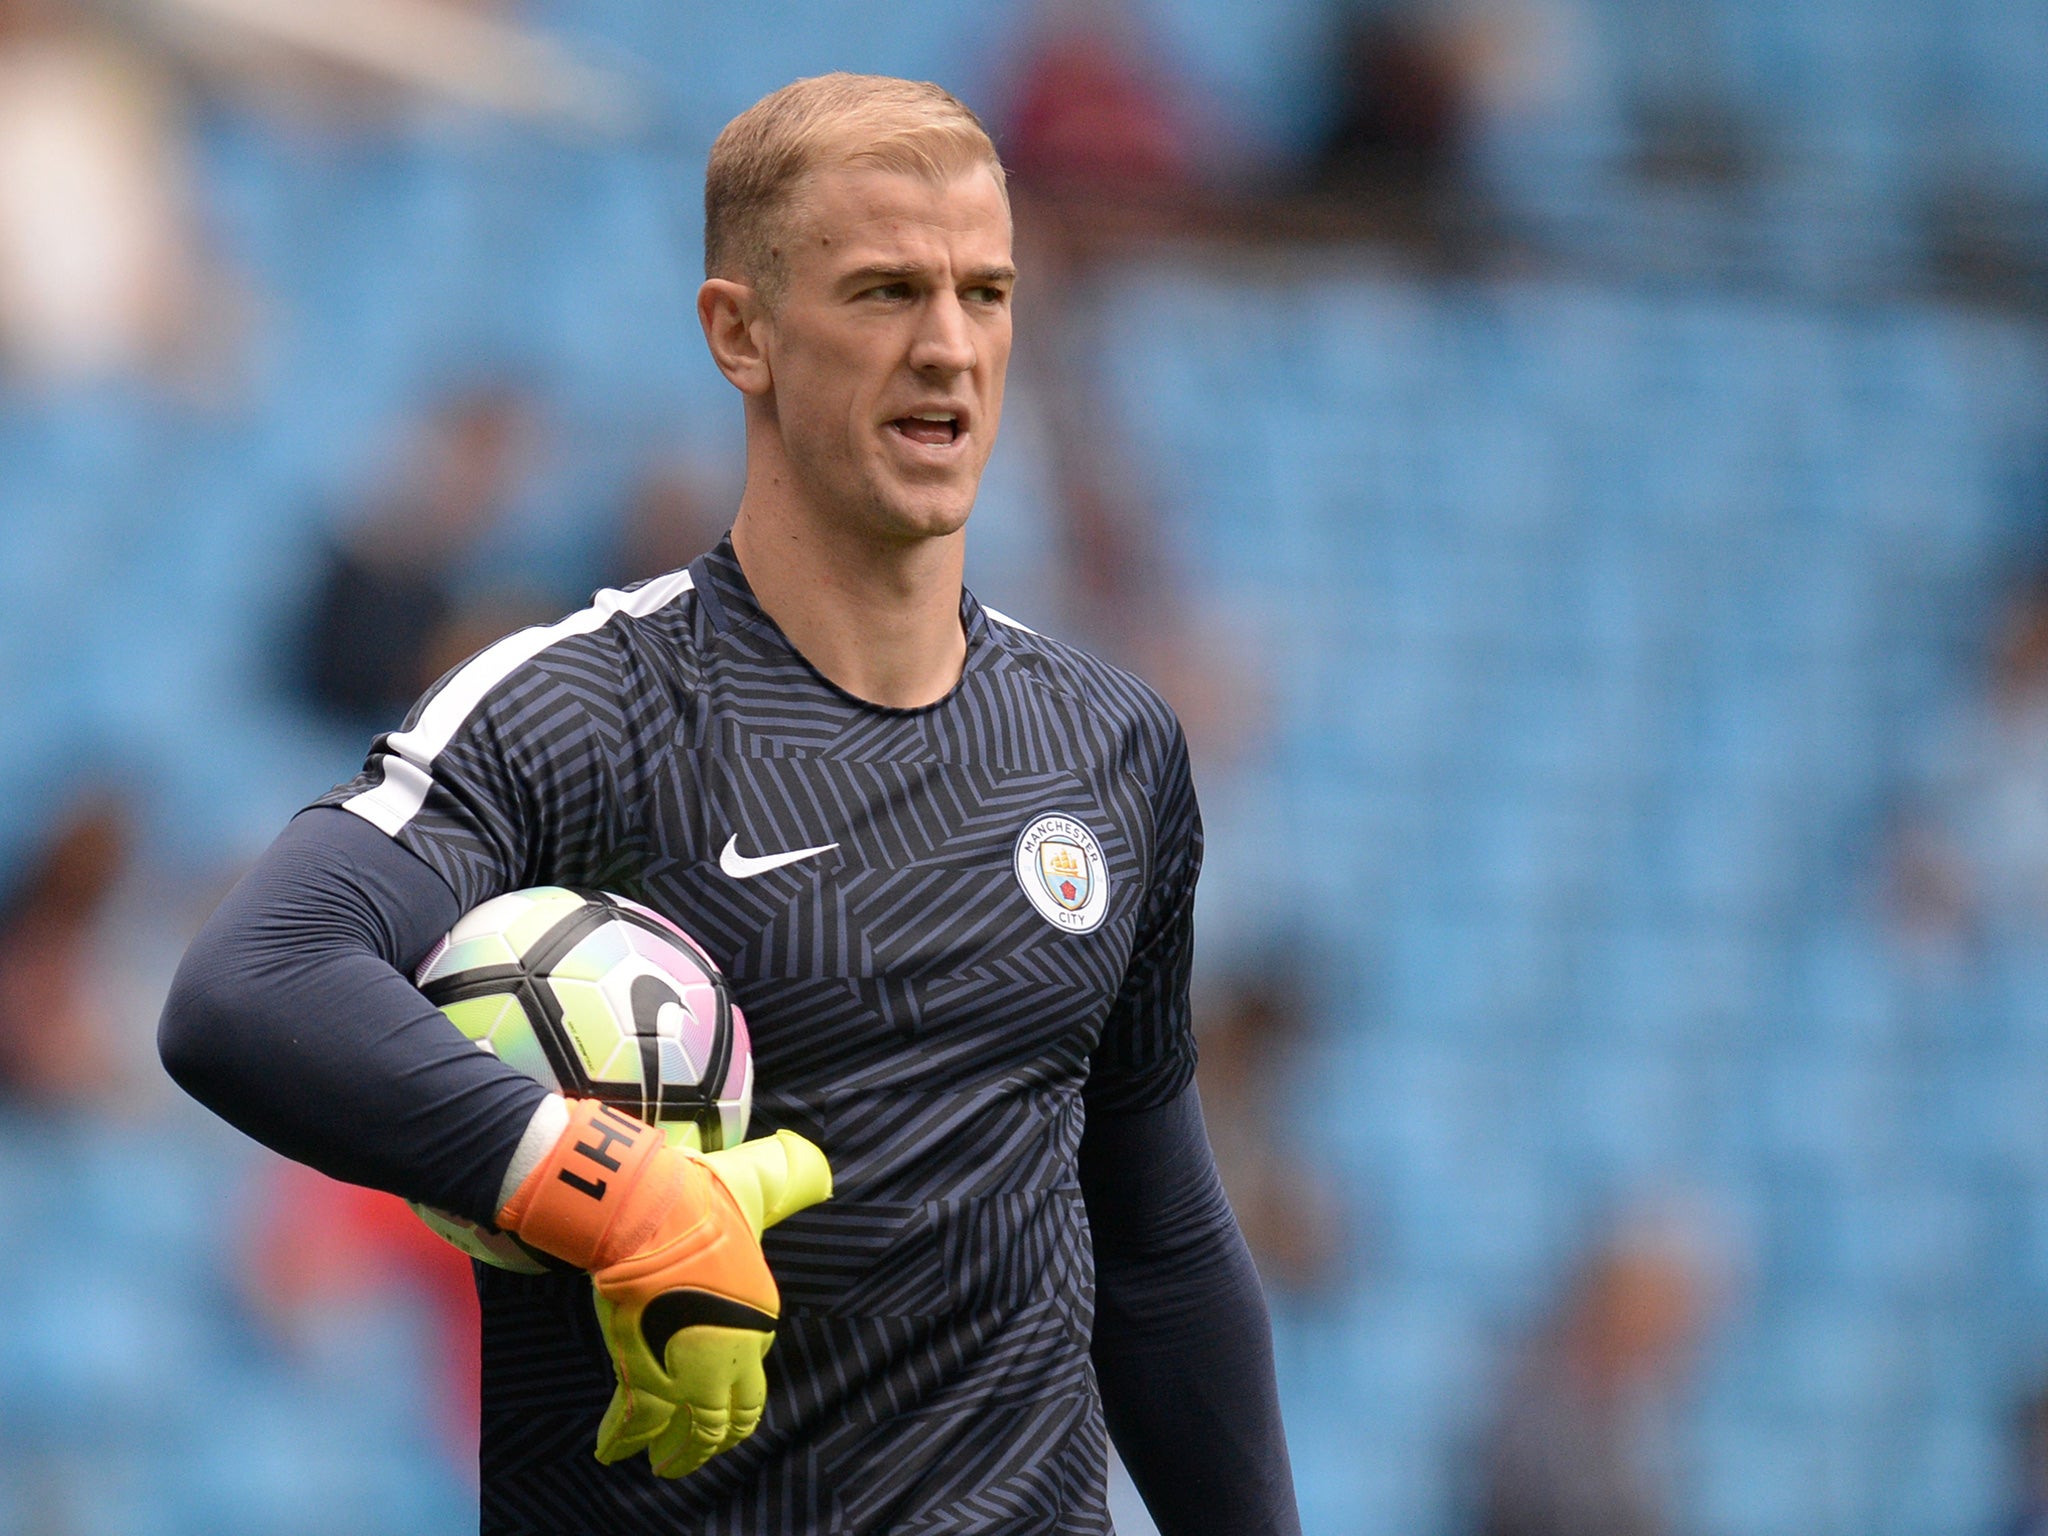 Hart during the warm-up before City's opener against Sunderland